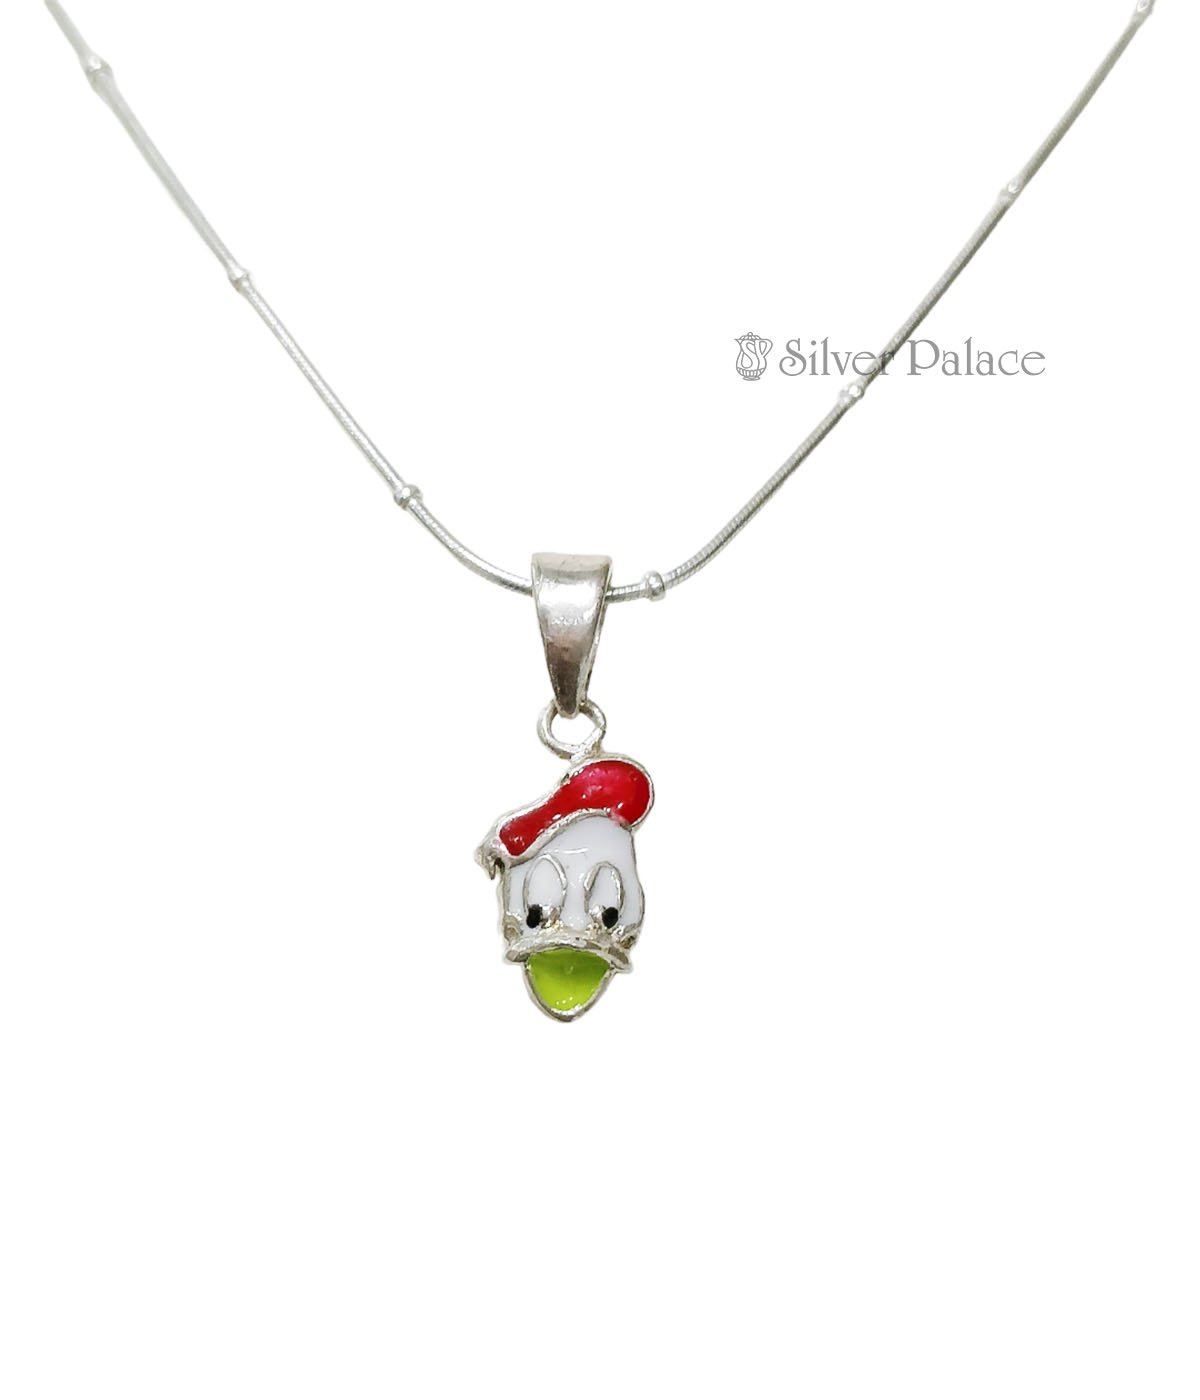 92.5 STERLING SILVER DONALD DUCK PENDANT